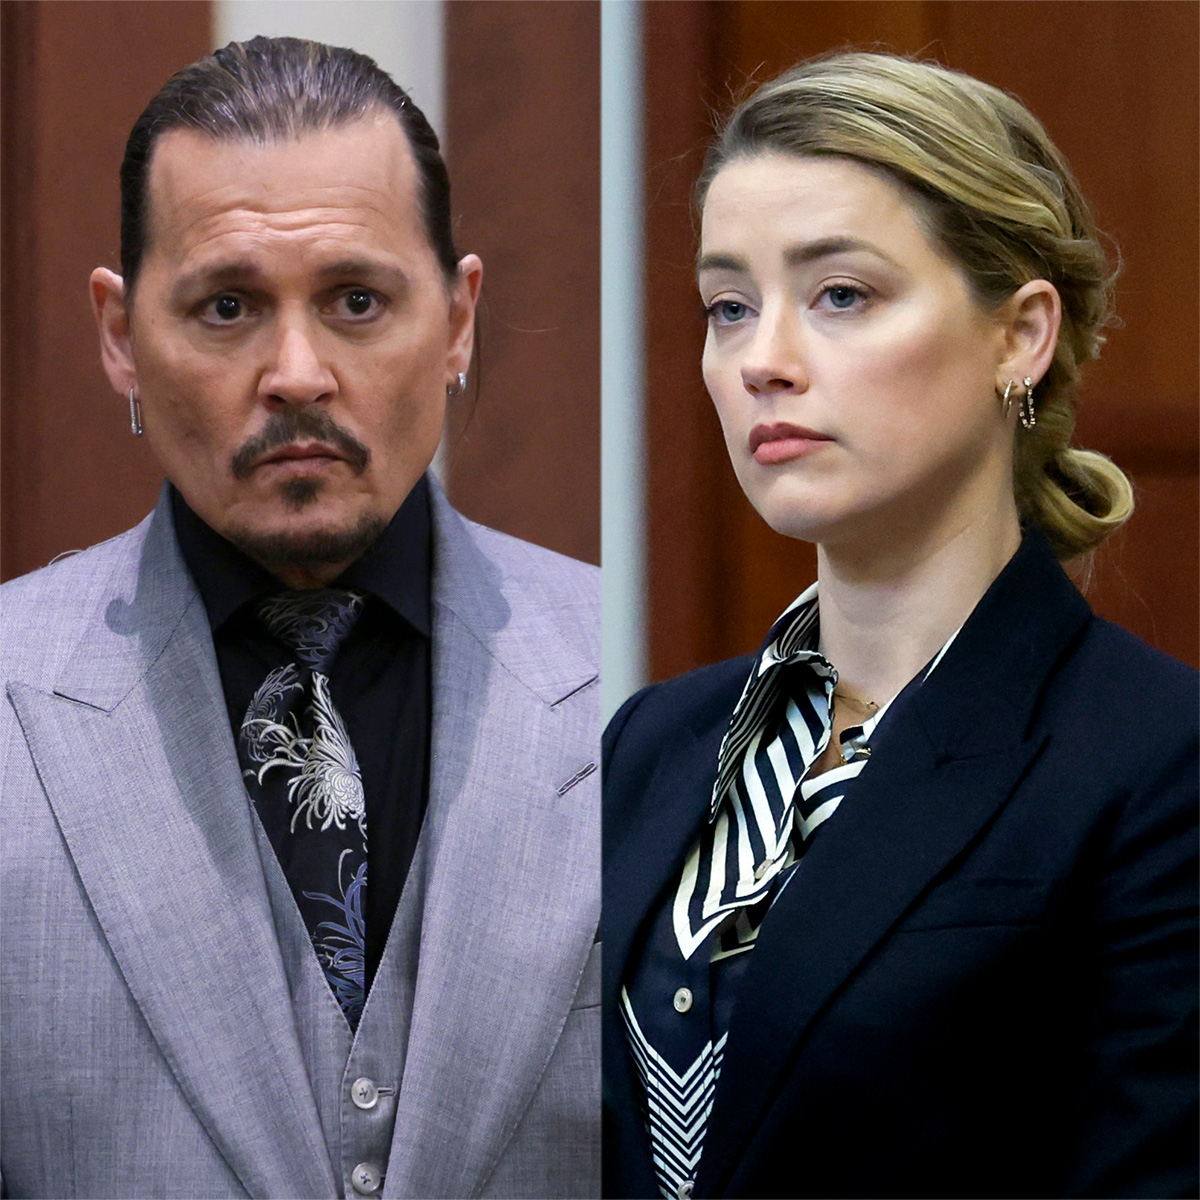 Judge Denies Amber Heard’s Request for a Mistrial